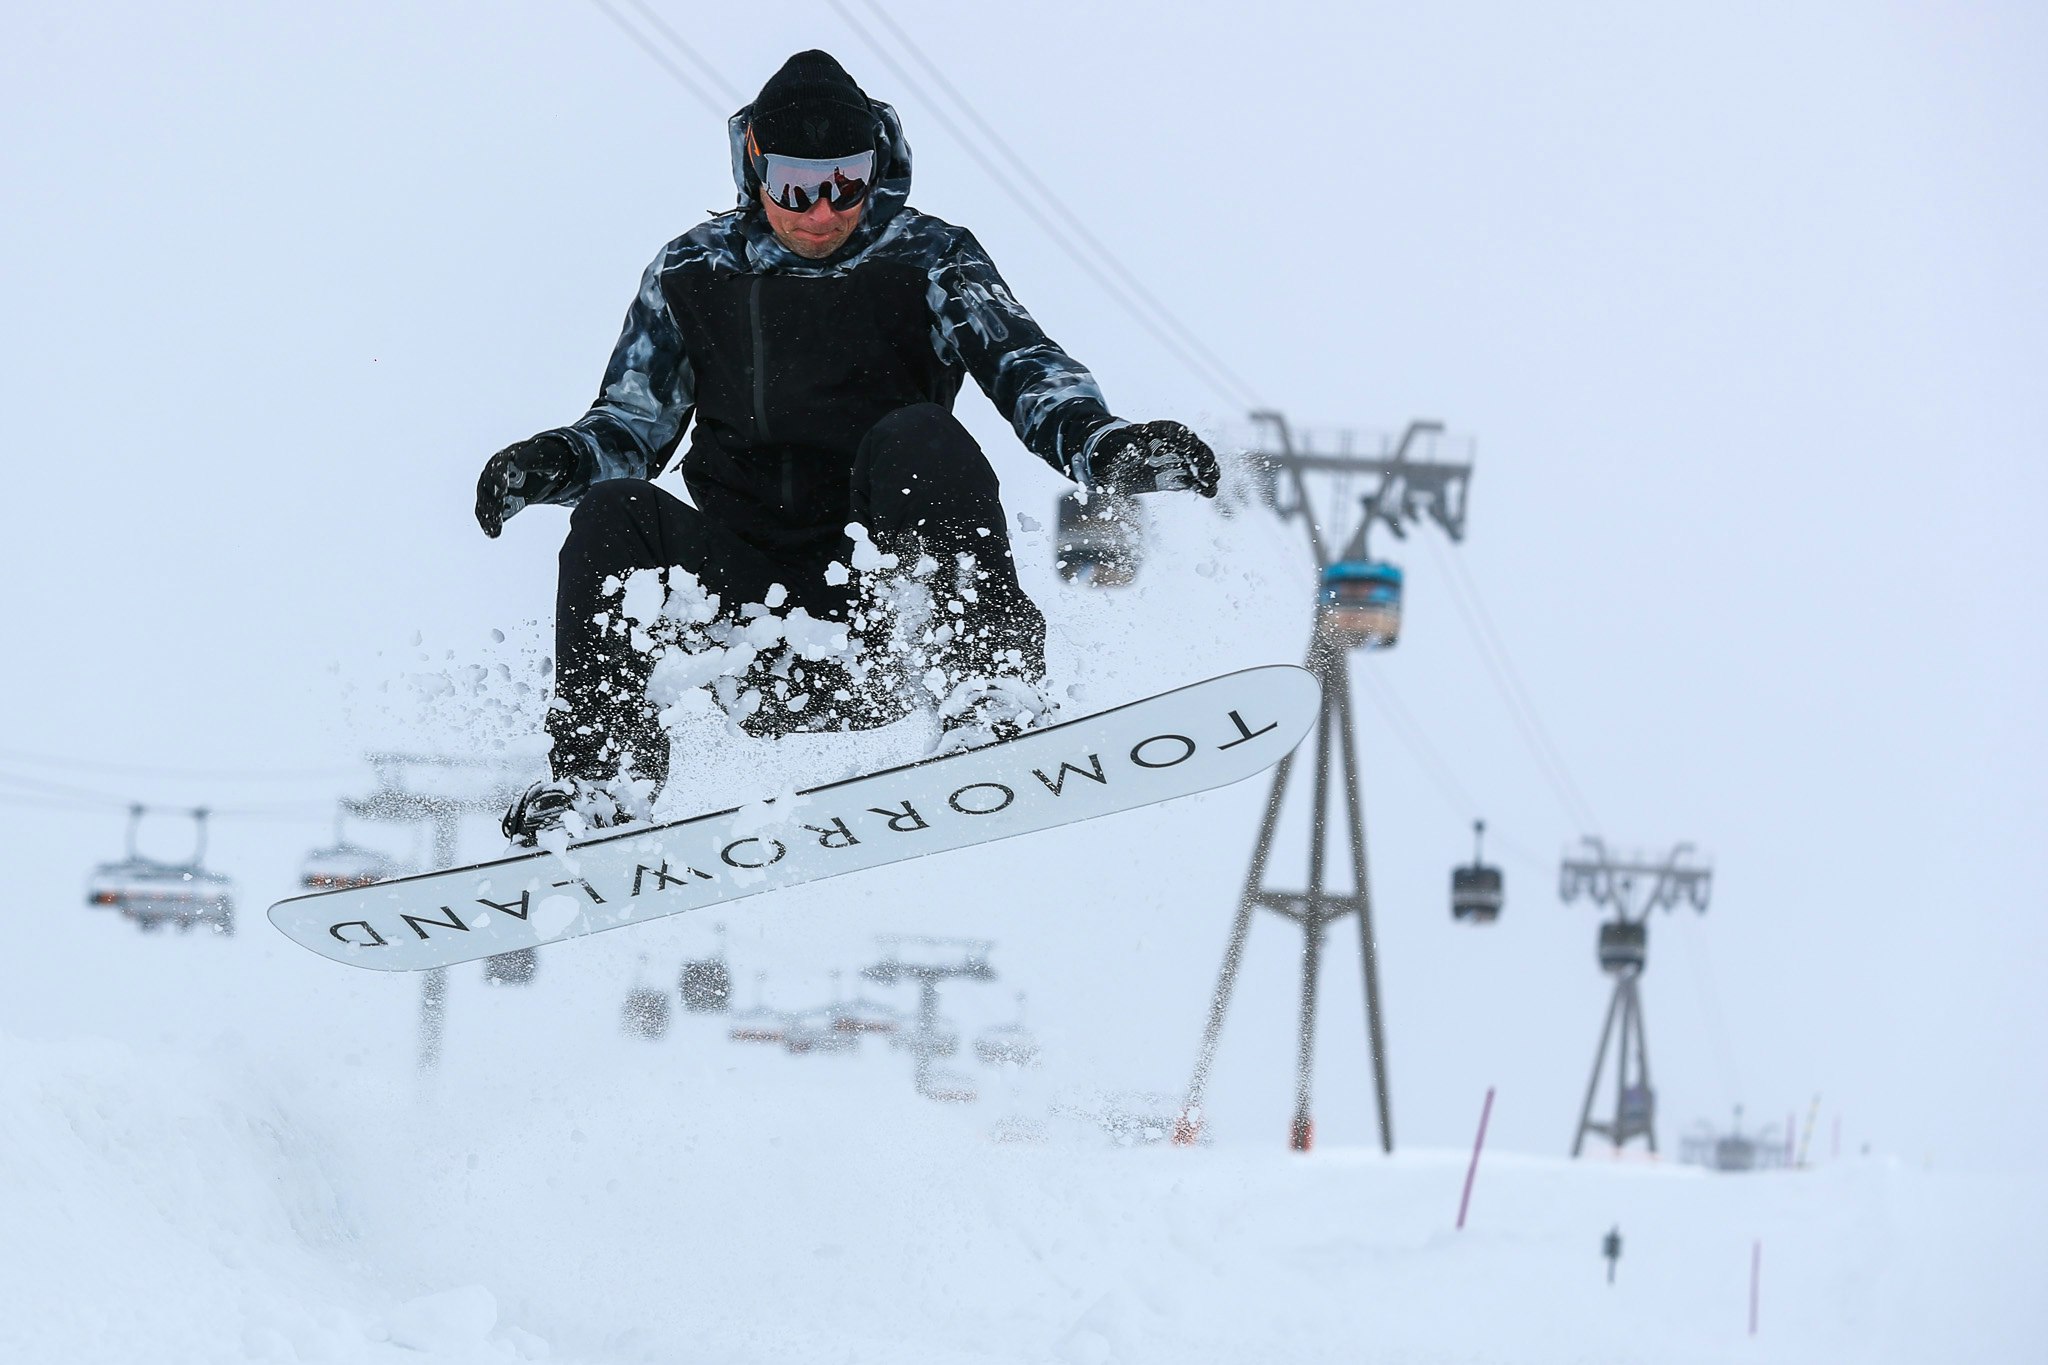 A snowboarder dressed all in black does a jump, exposing the underside of their board which reads 'TOMORROWLAND' at Tomorrowland Winter in Alpe D'Huez, France. 